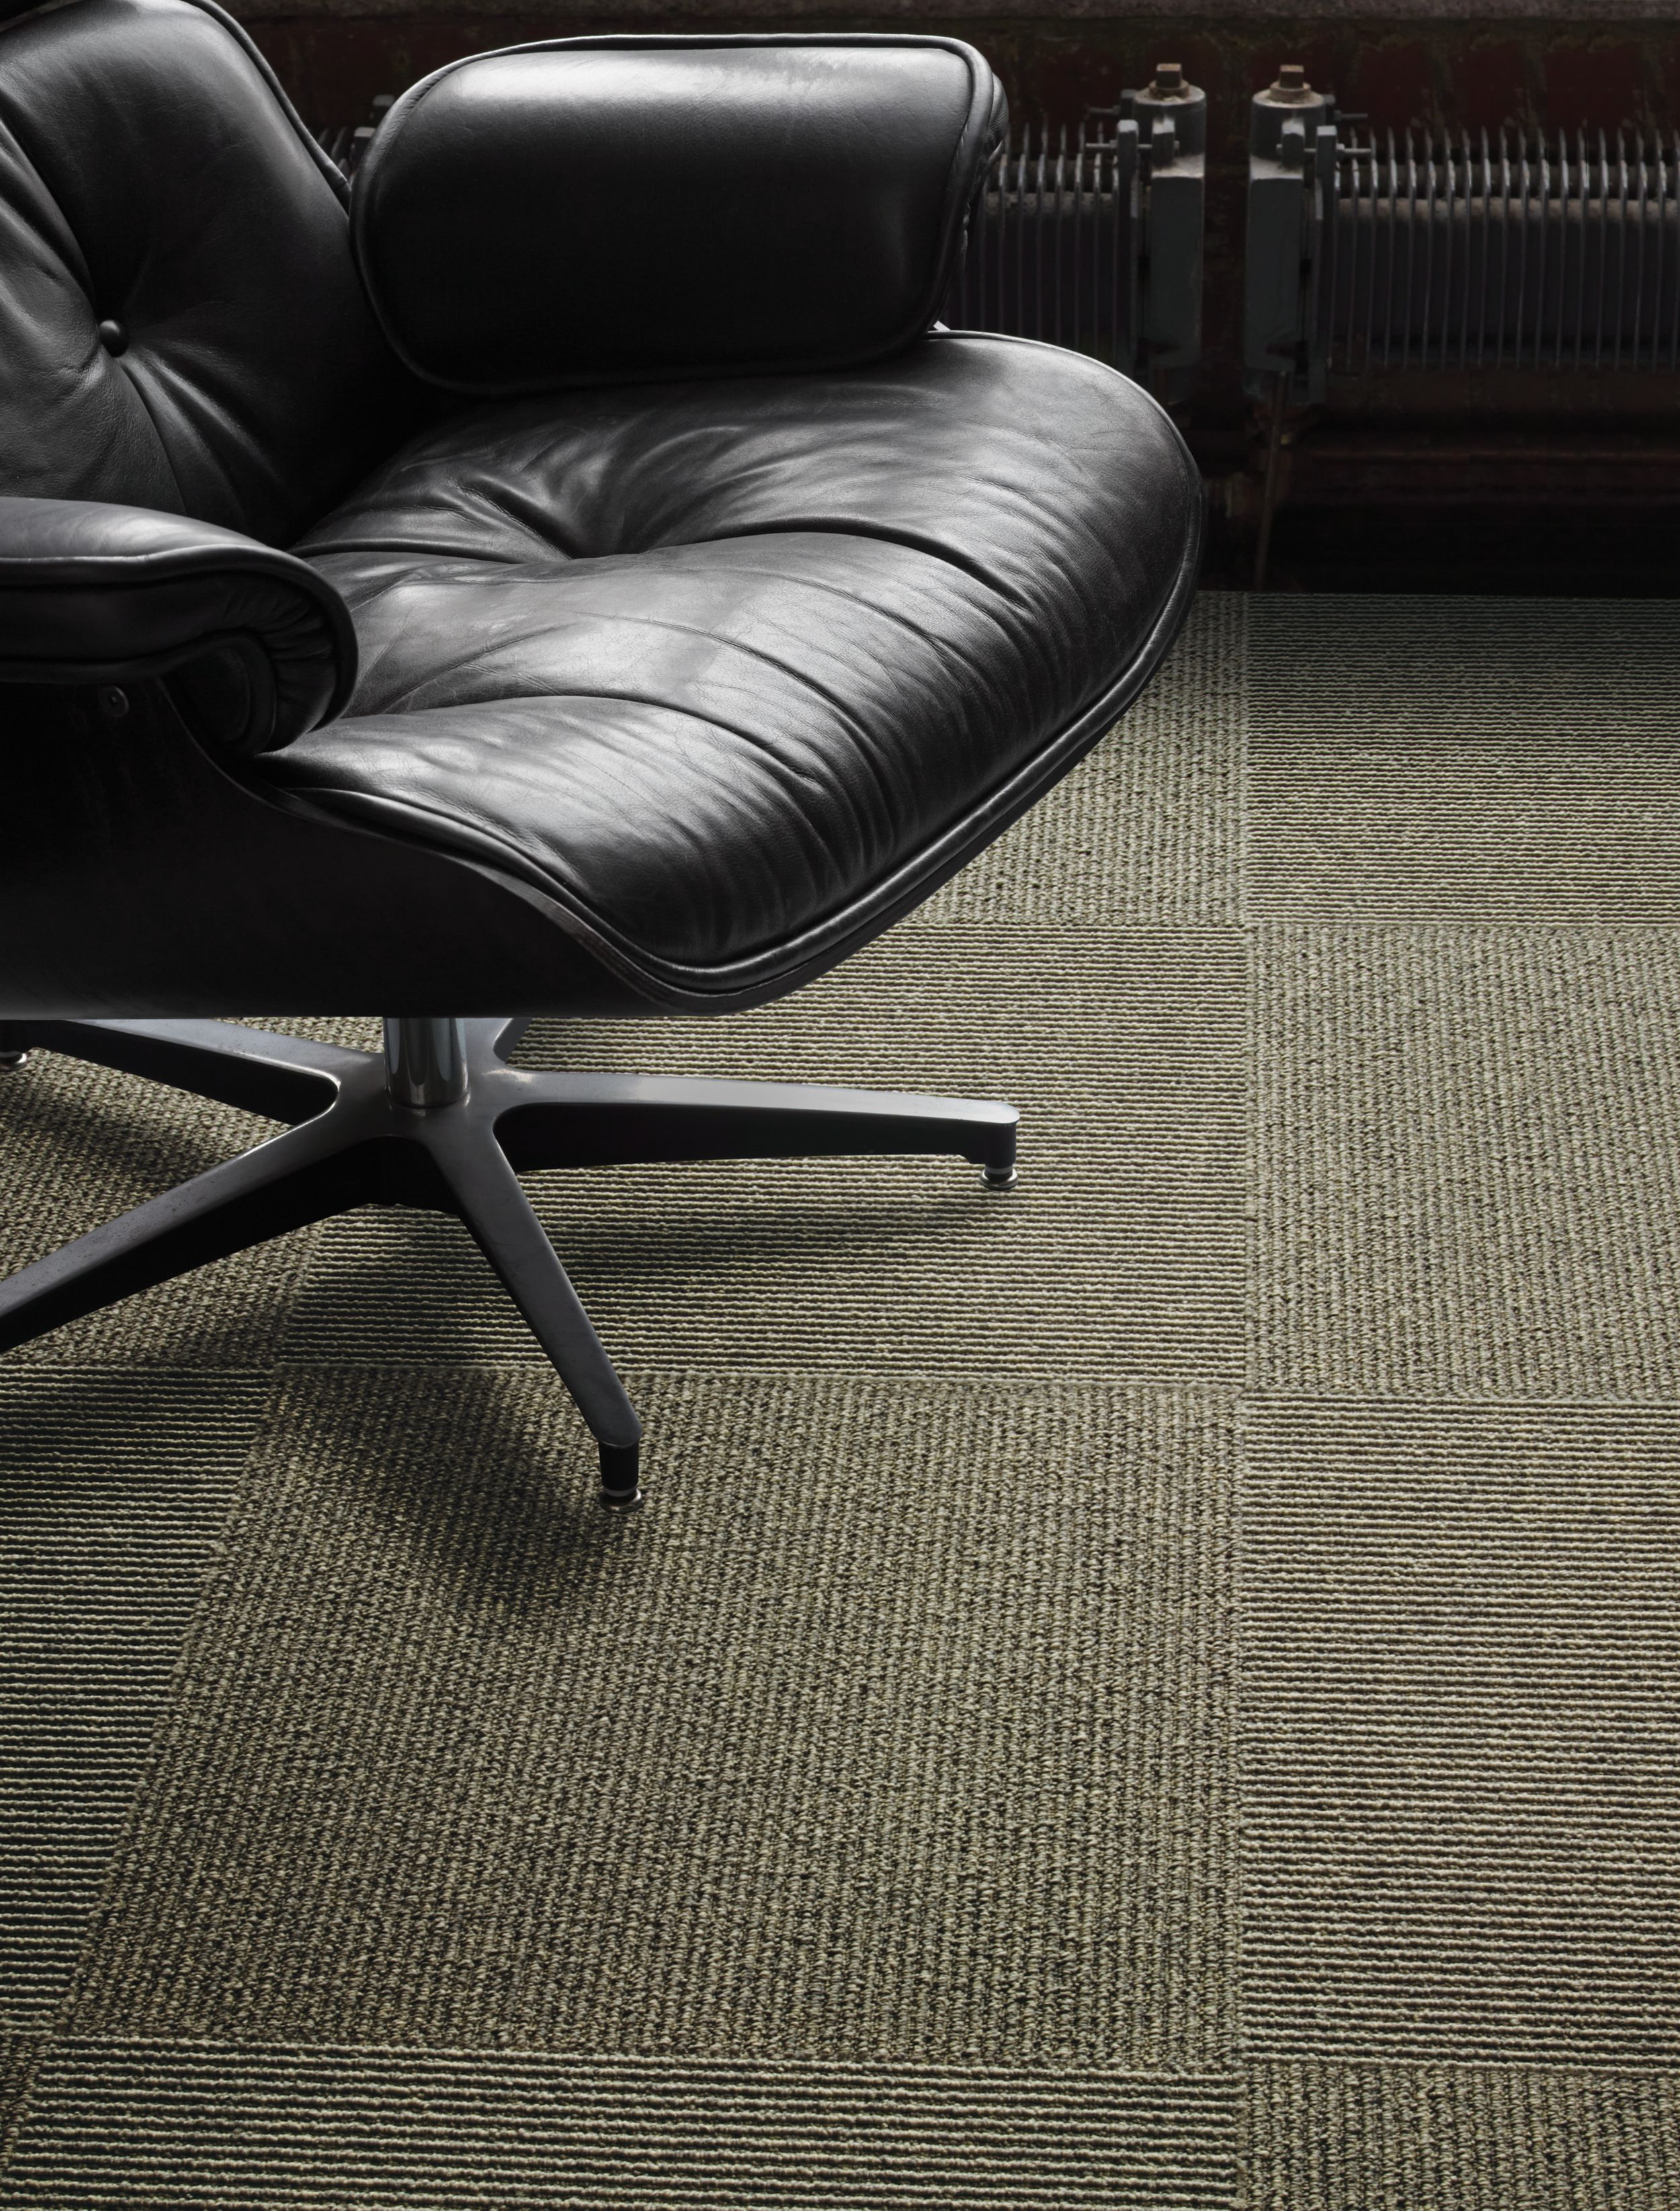 Interface UR203 carpet tile in a close up with leather chair imagen número 4